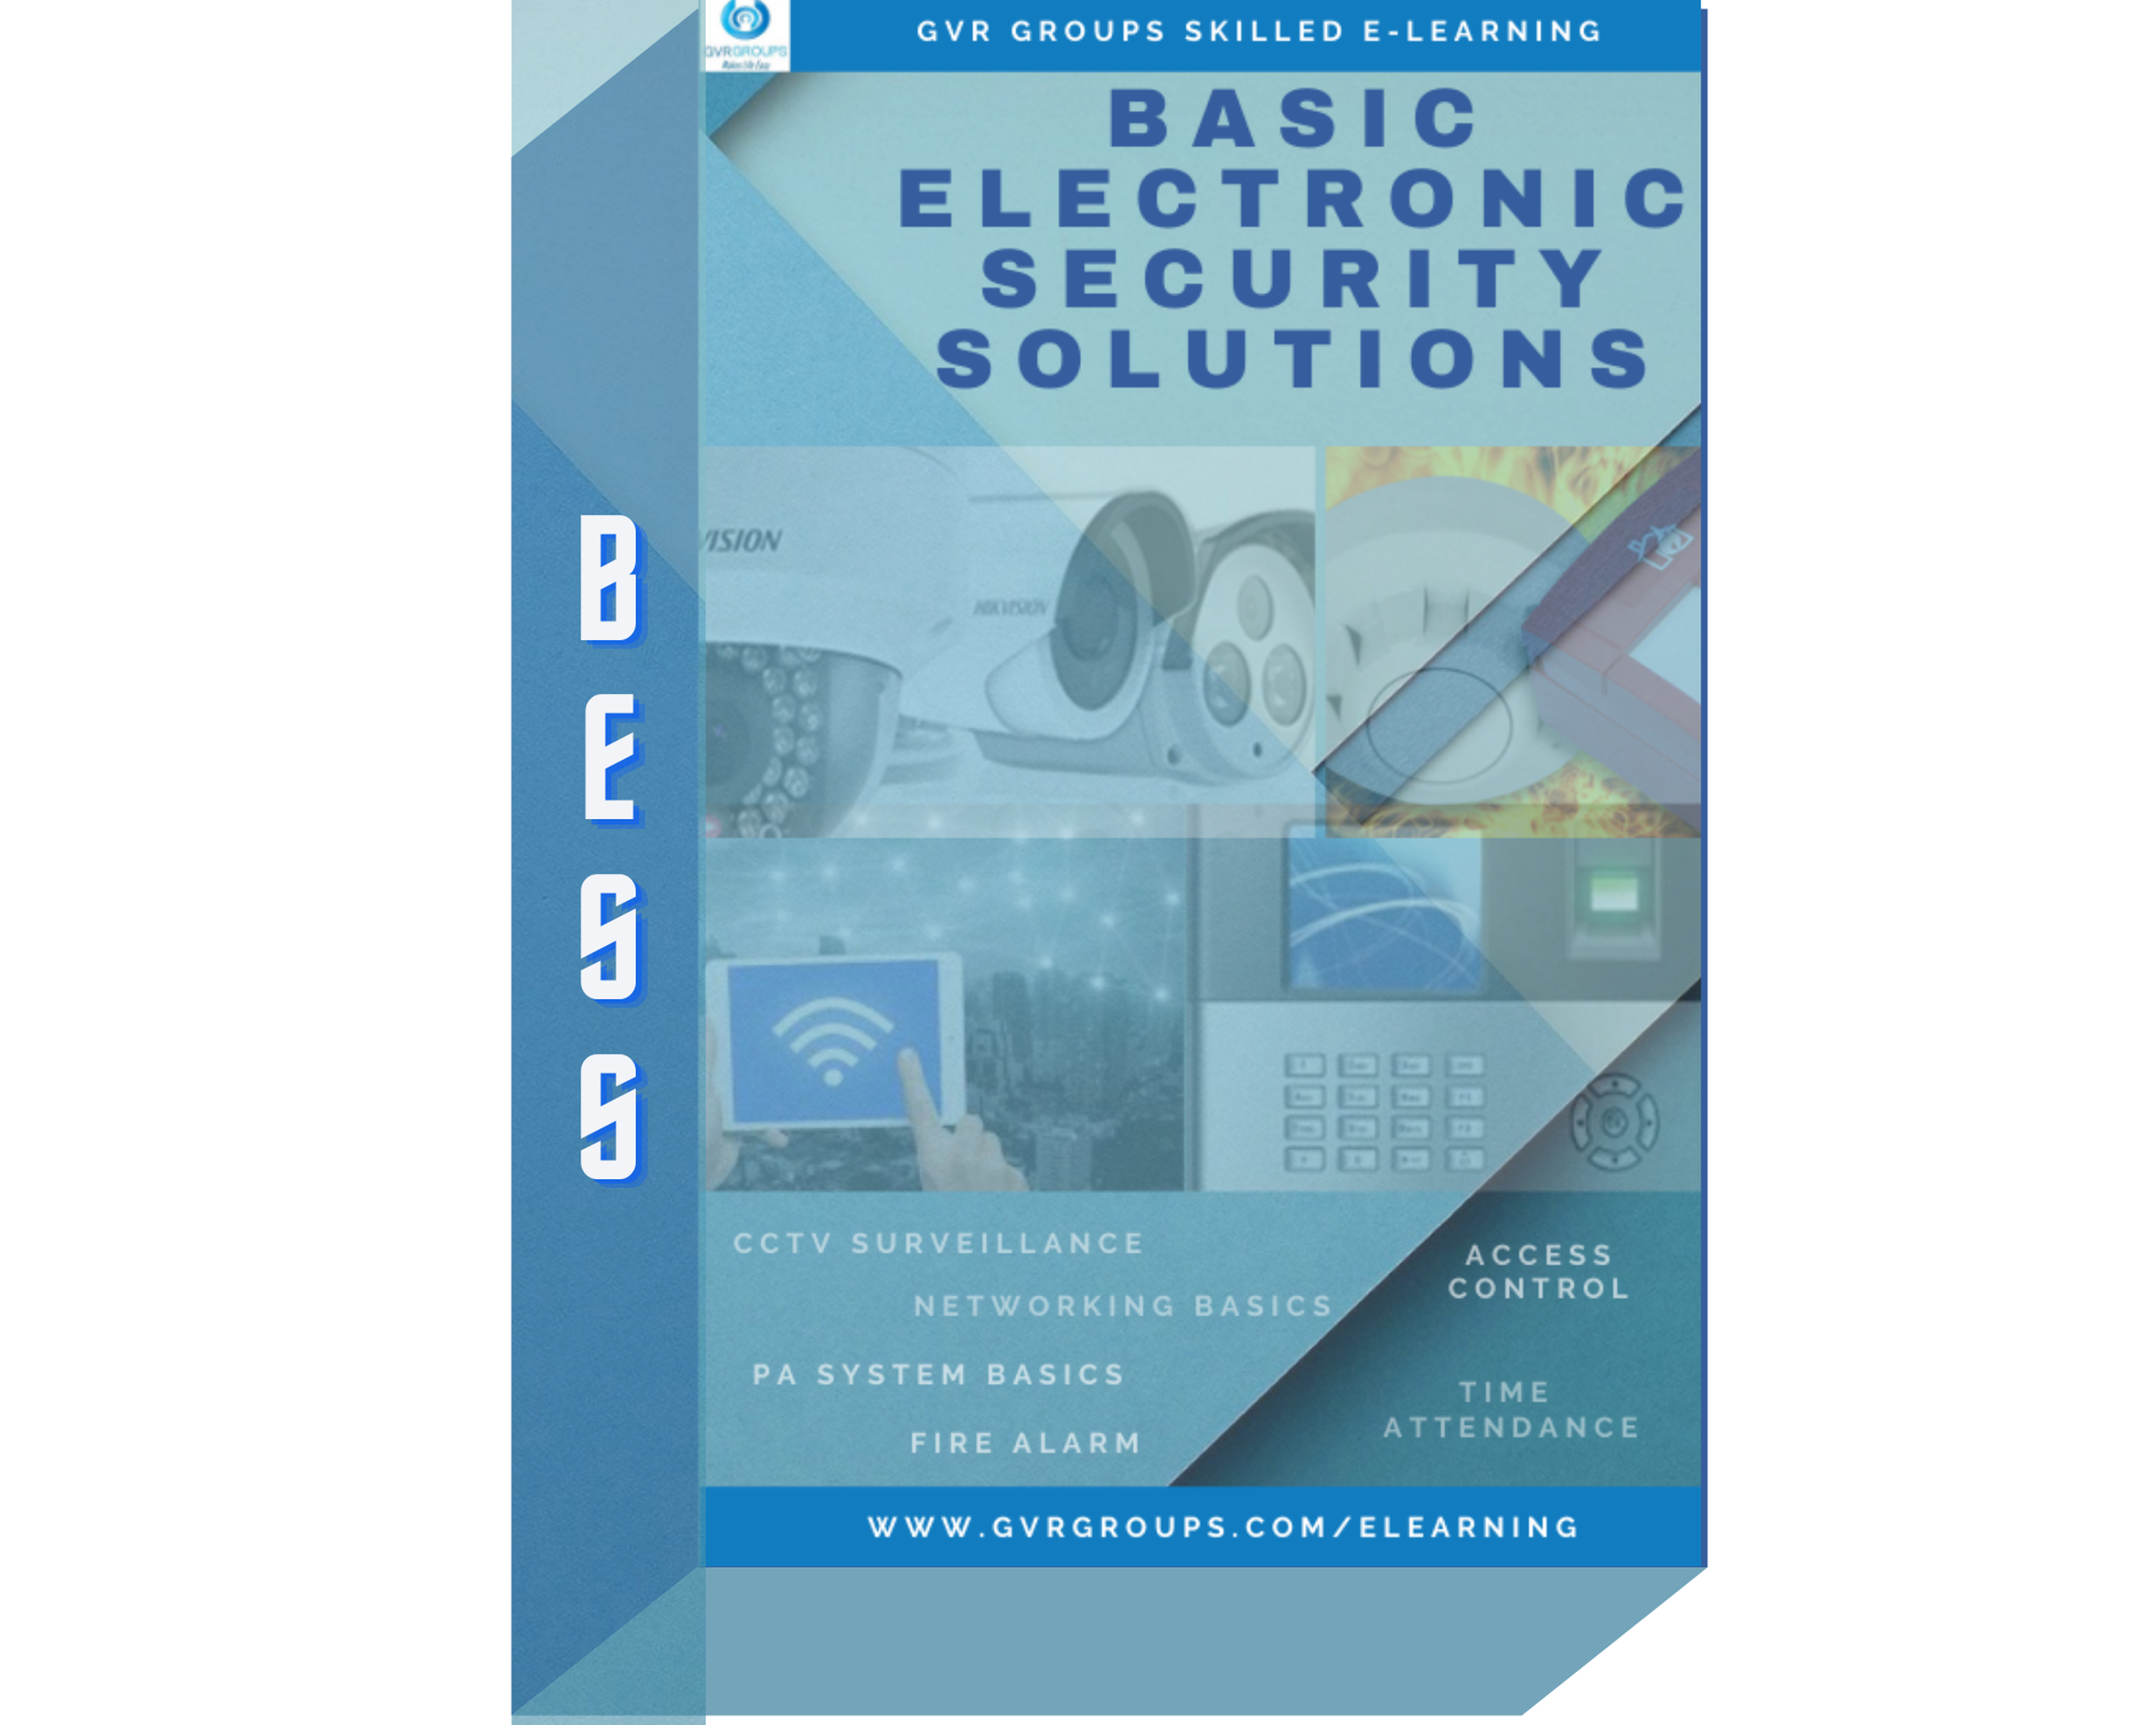 Basic Electronic Security Solutions E-learning Course